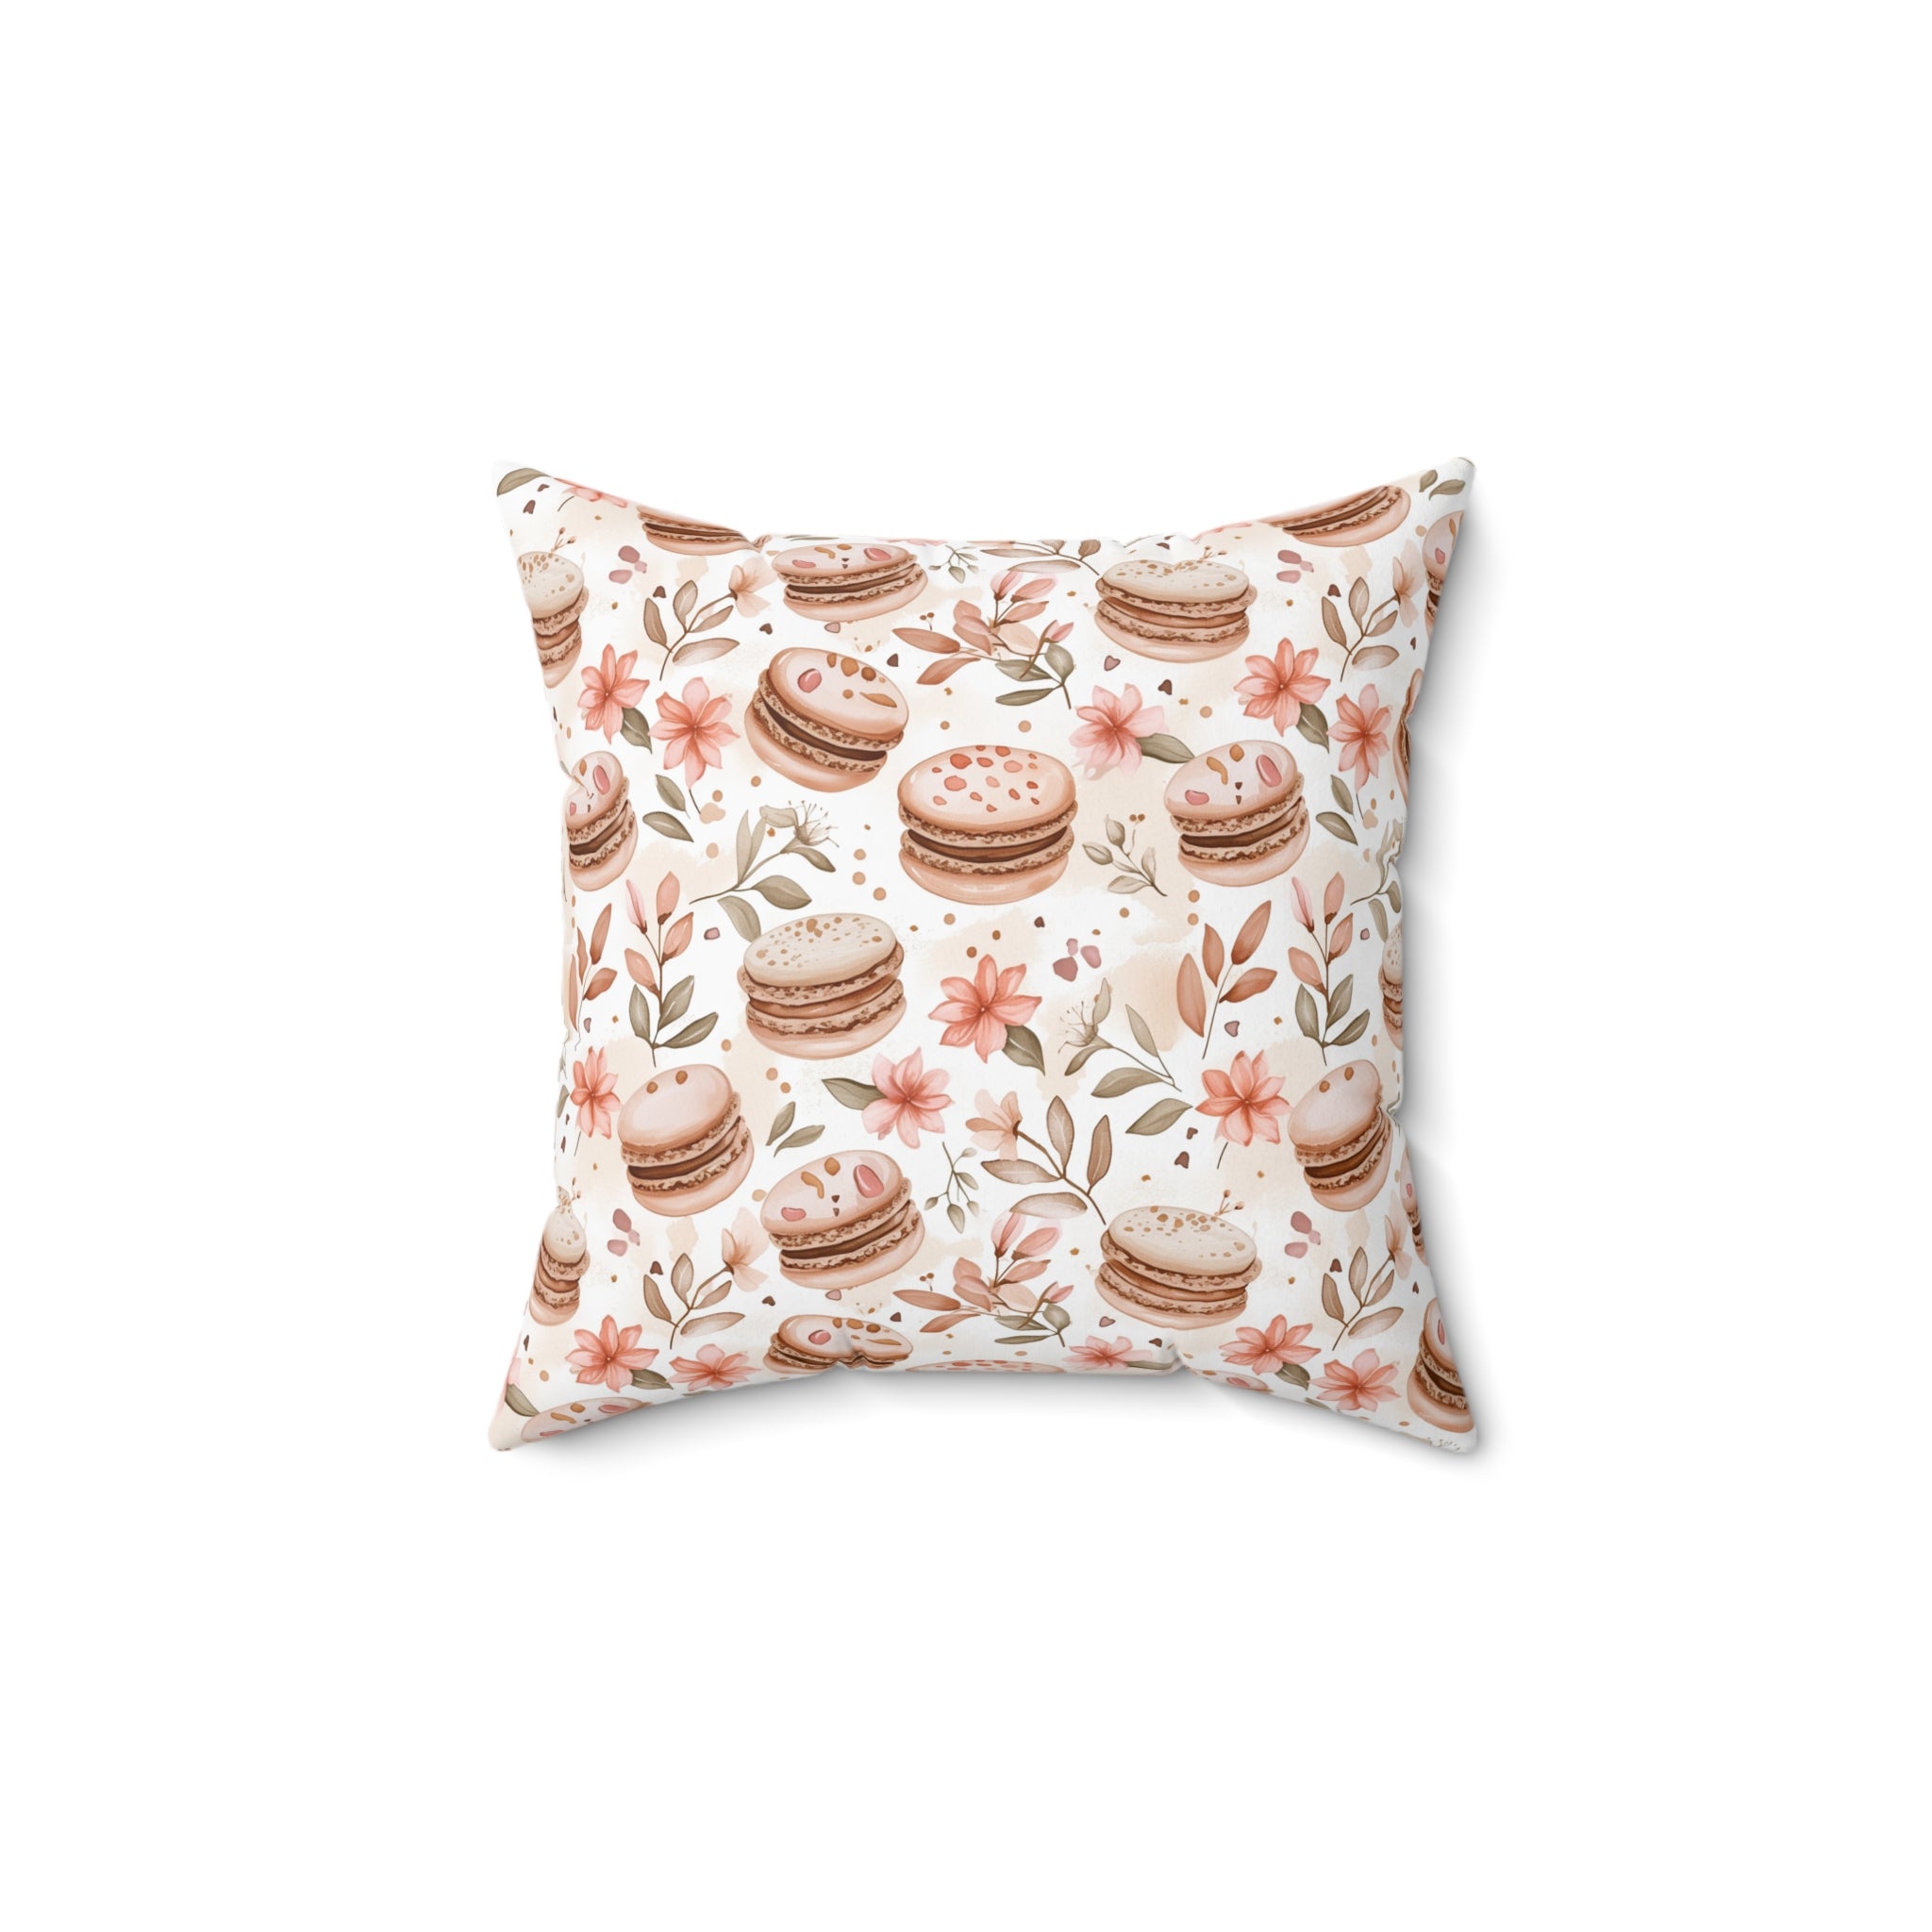 <p class="p1">Indulge in sweet dreams as you rest your head on this macaroon-inspired pillow. Its inviting design and softness make it the perfect companion for relaxation and comfort.</p> <p class="p1">&nbsp;</p>